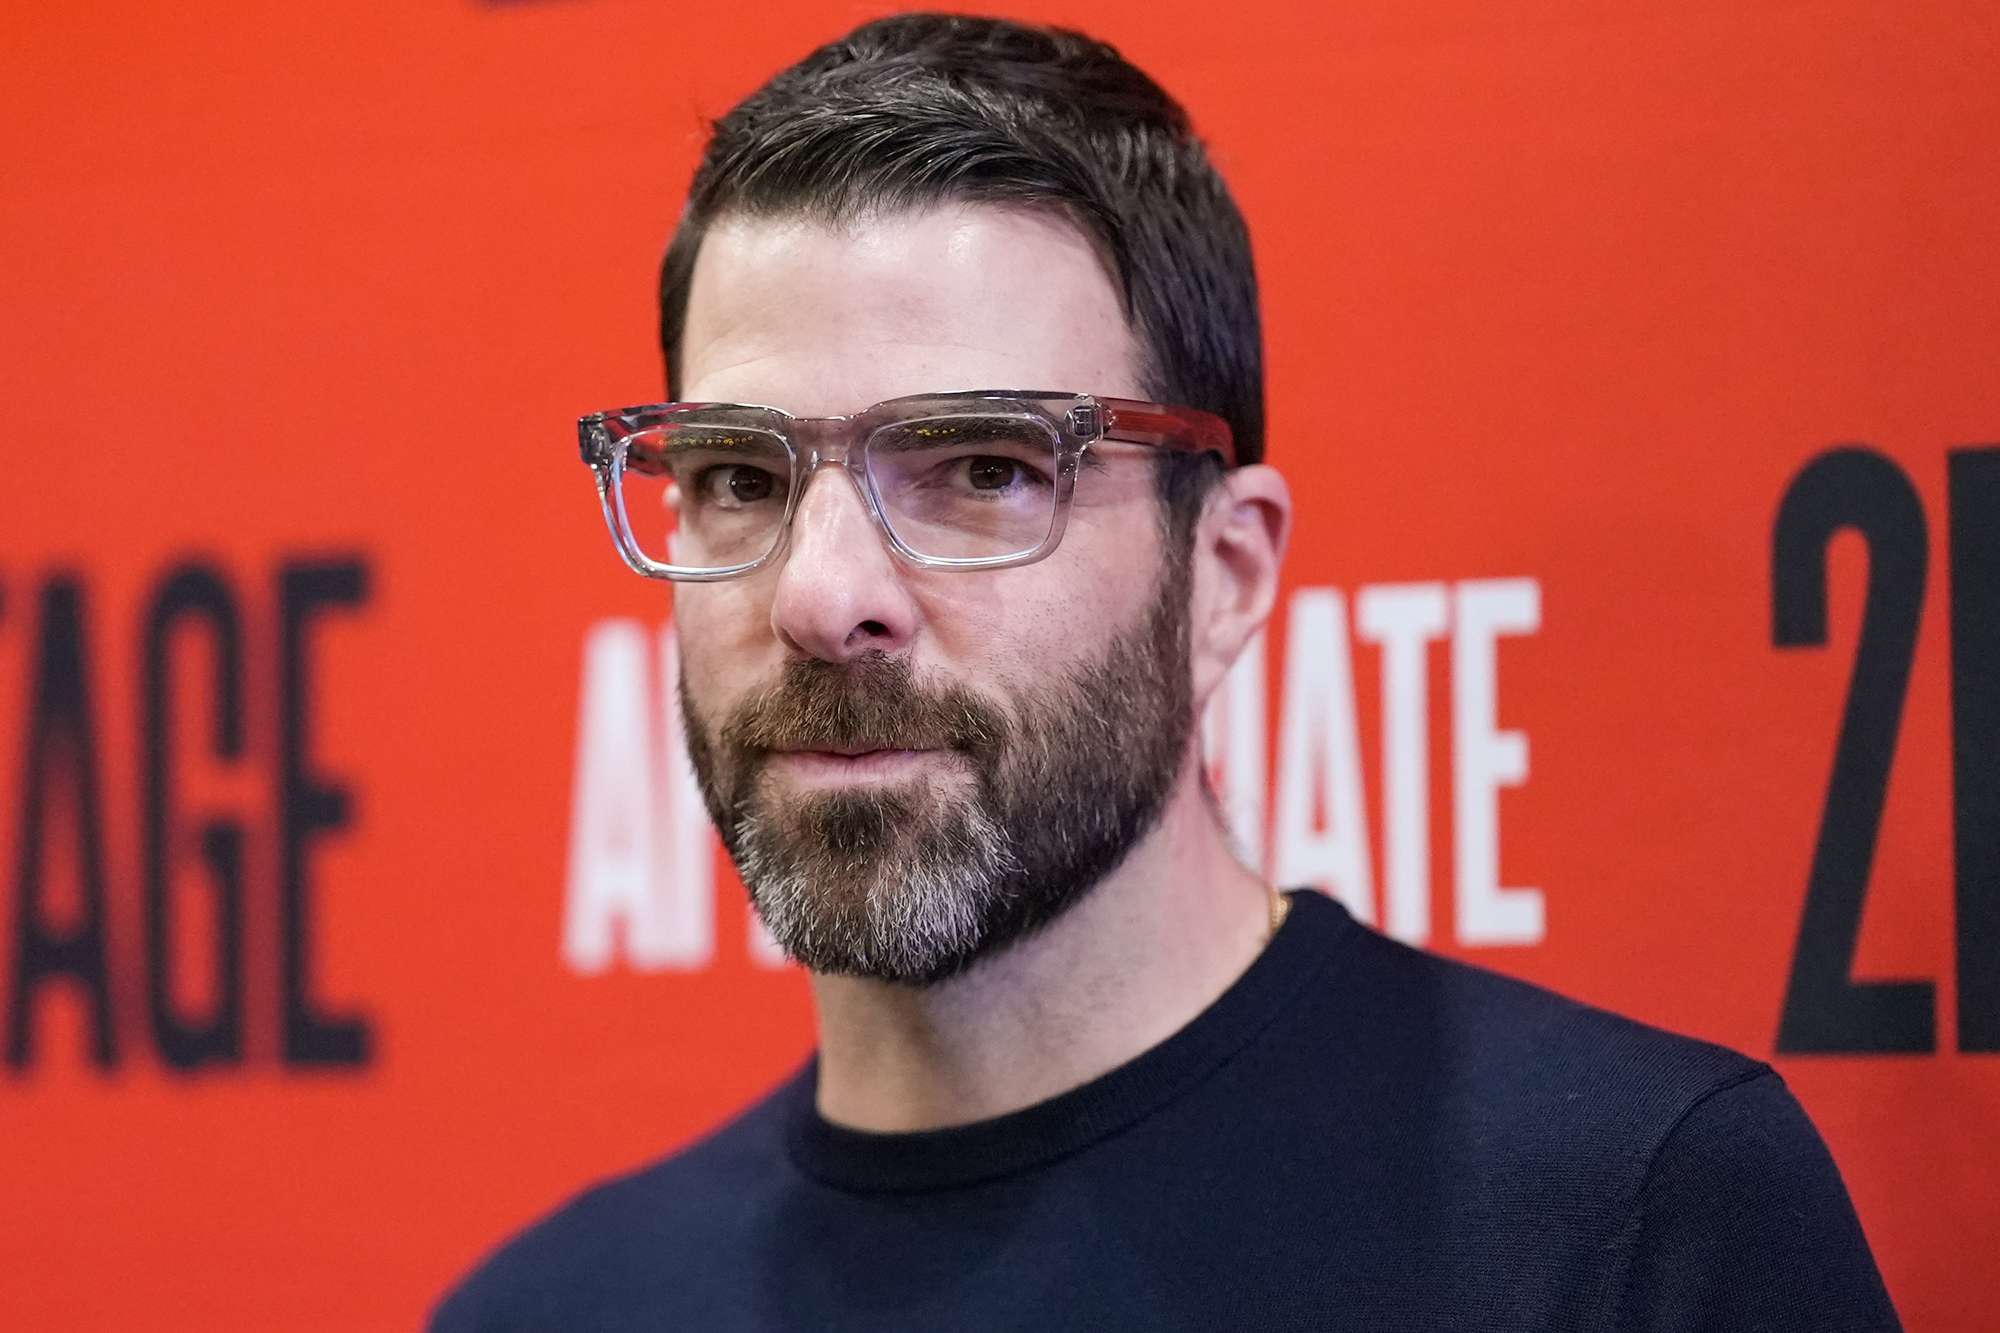 Zachary Quinto Criticized by Toronto Restaurant for Reportedly Yelling at Staff 'Like Entitled Child' and Making 'Host Cry'